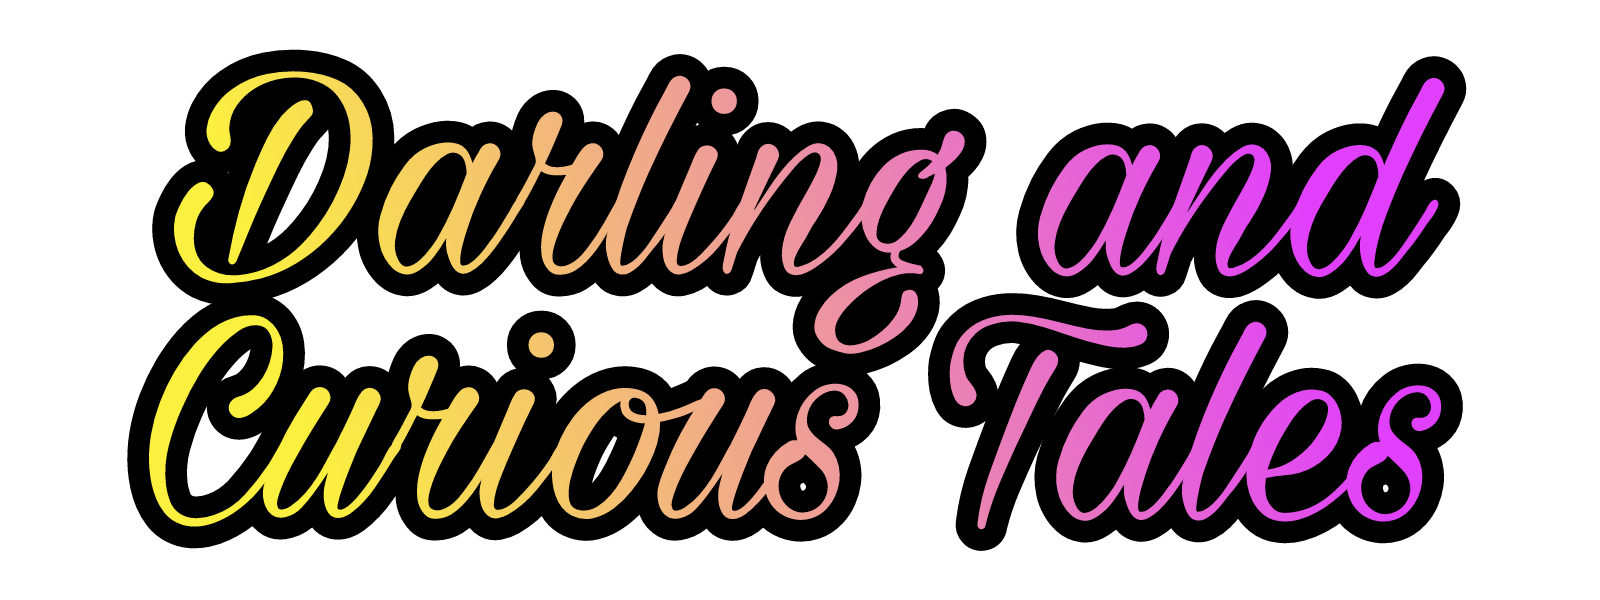 Darling and Curious Tales